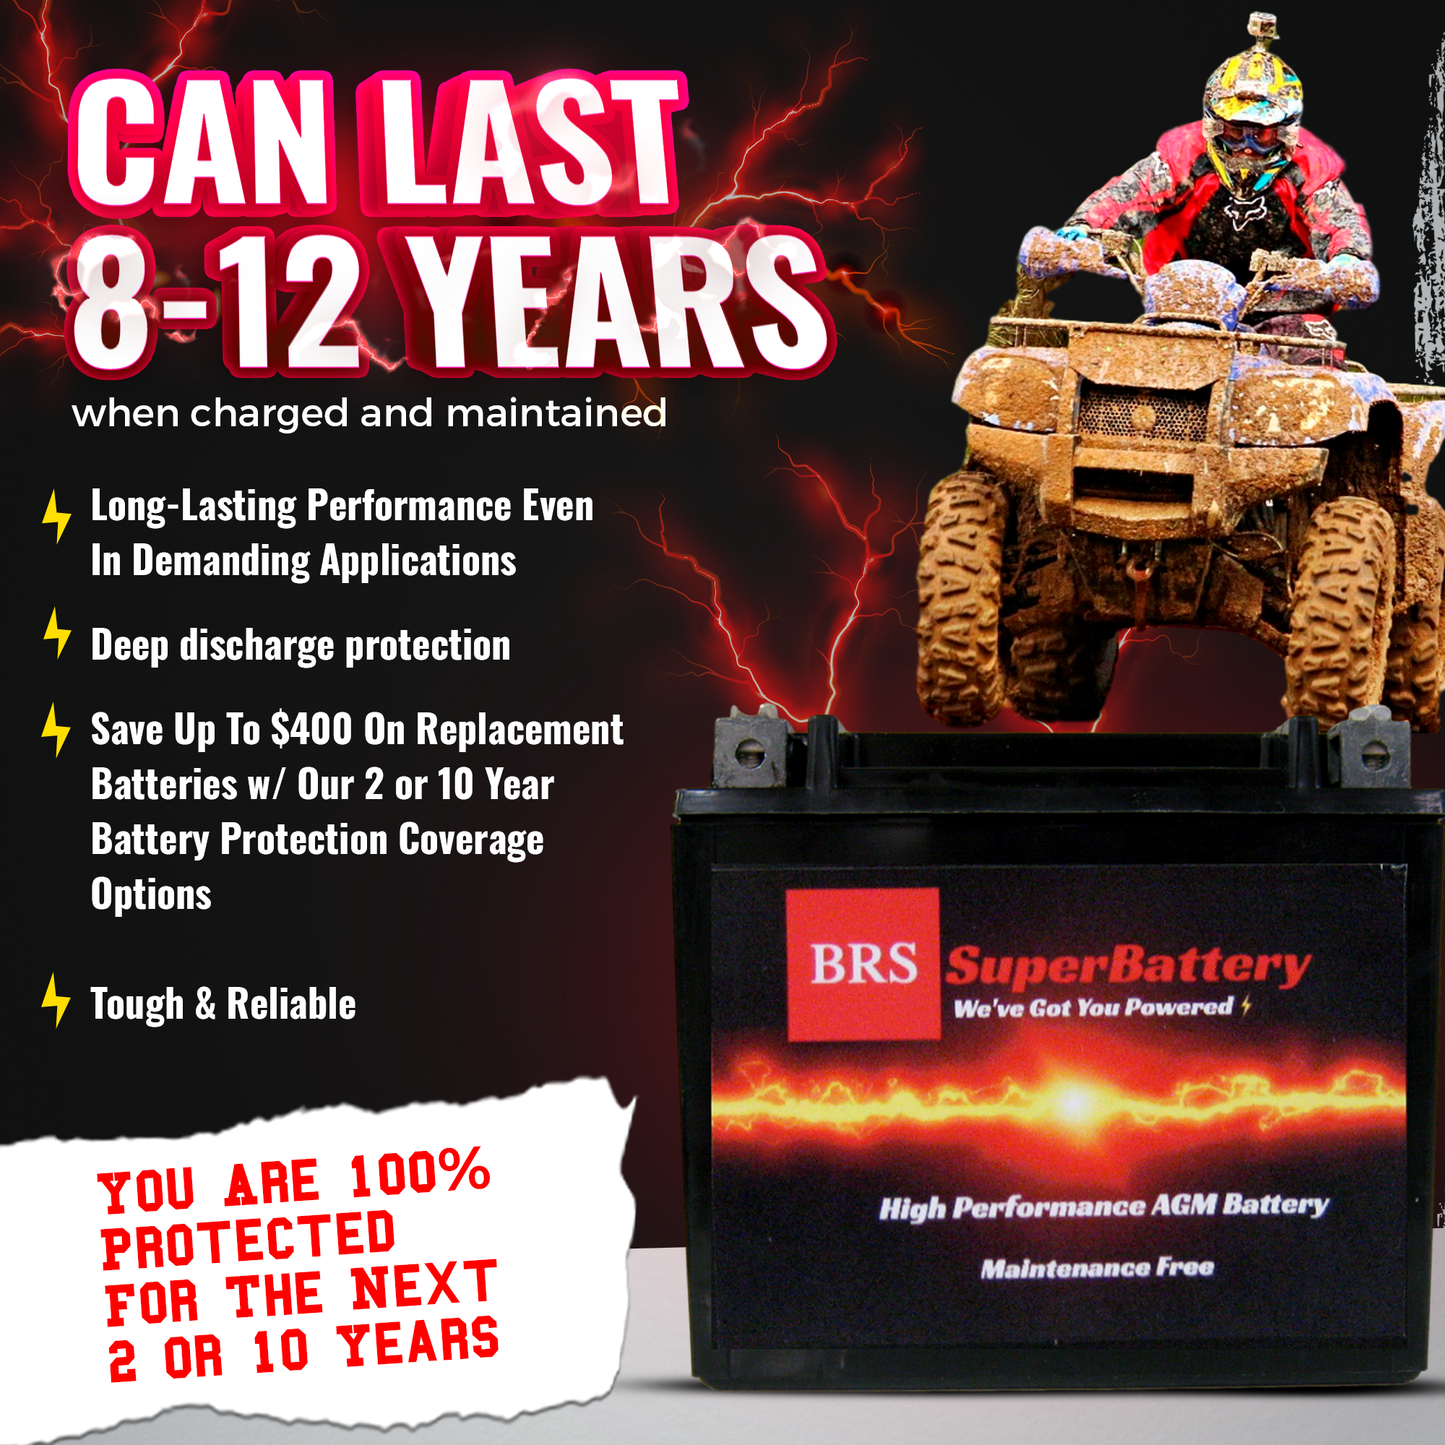 BRS4L-BS 12v High Performance Sealed AGM PowerSport 10 Year Battery - BRS Super Battery